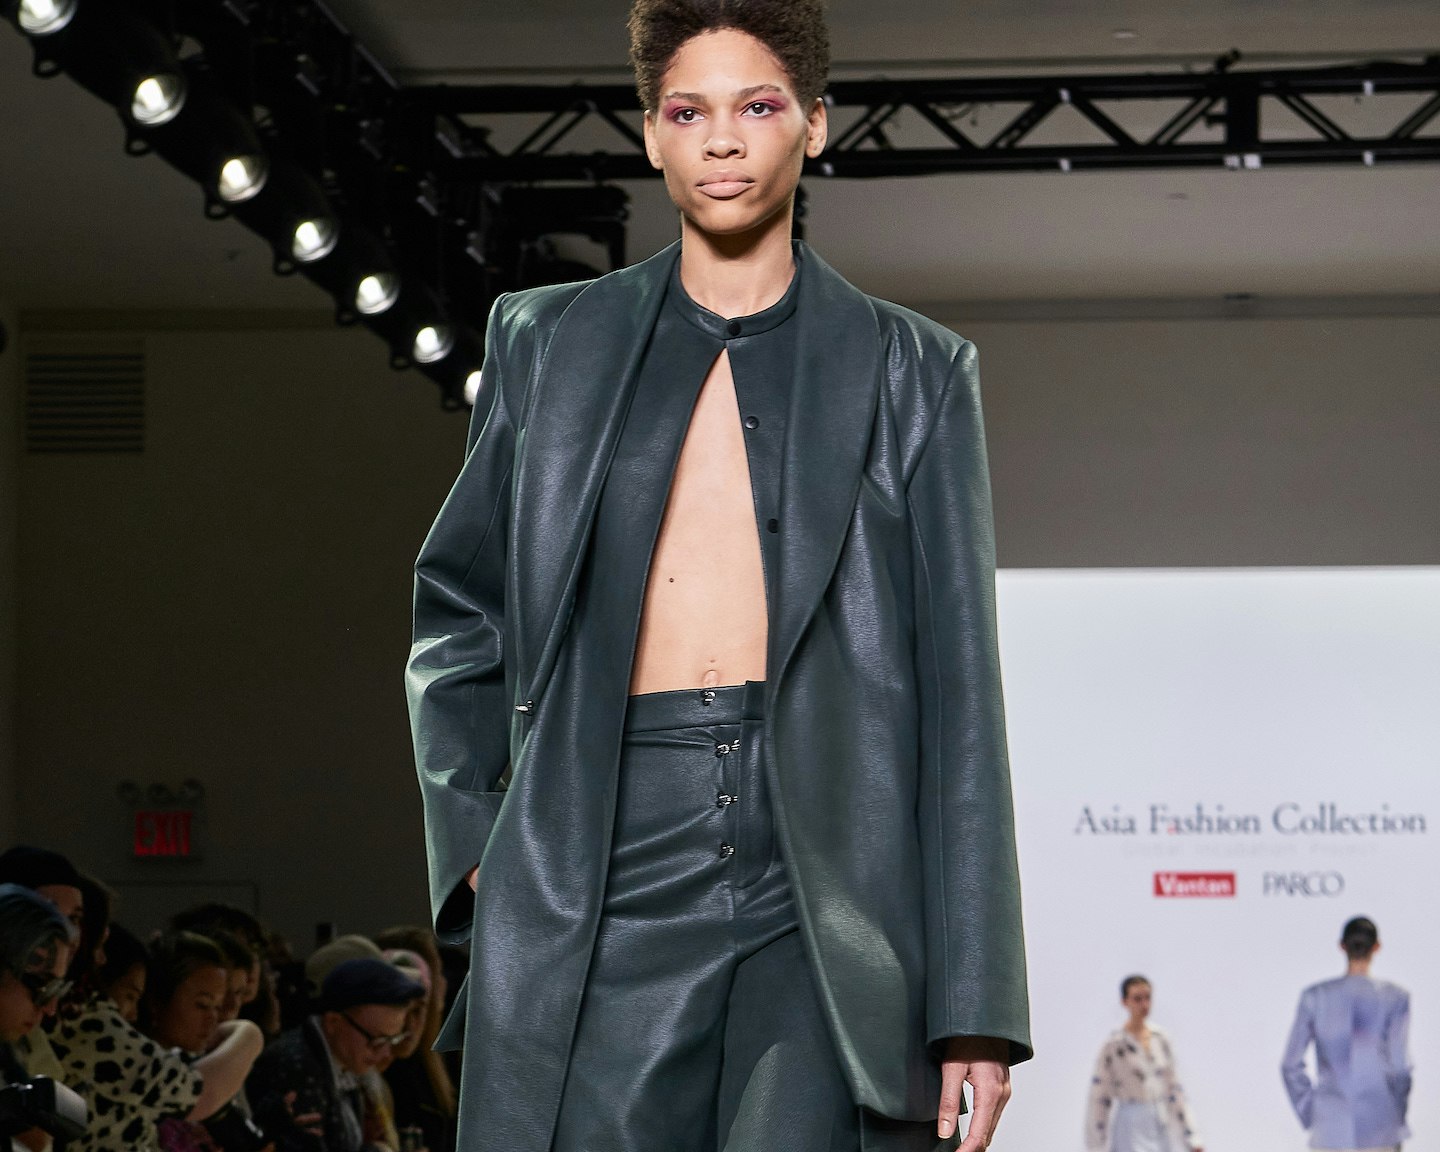 Asia Fashion Collection (AFC) The Next Asian Designers To Disrupt Fashion  Come to NYFW